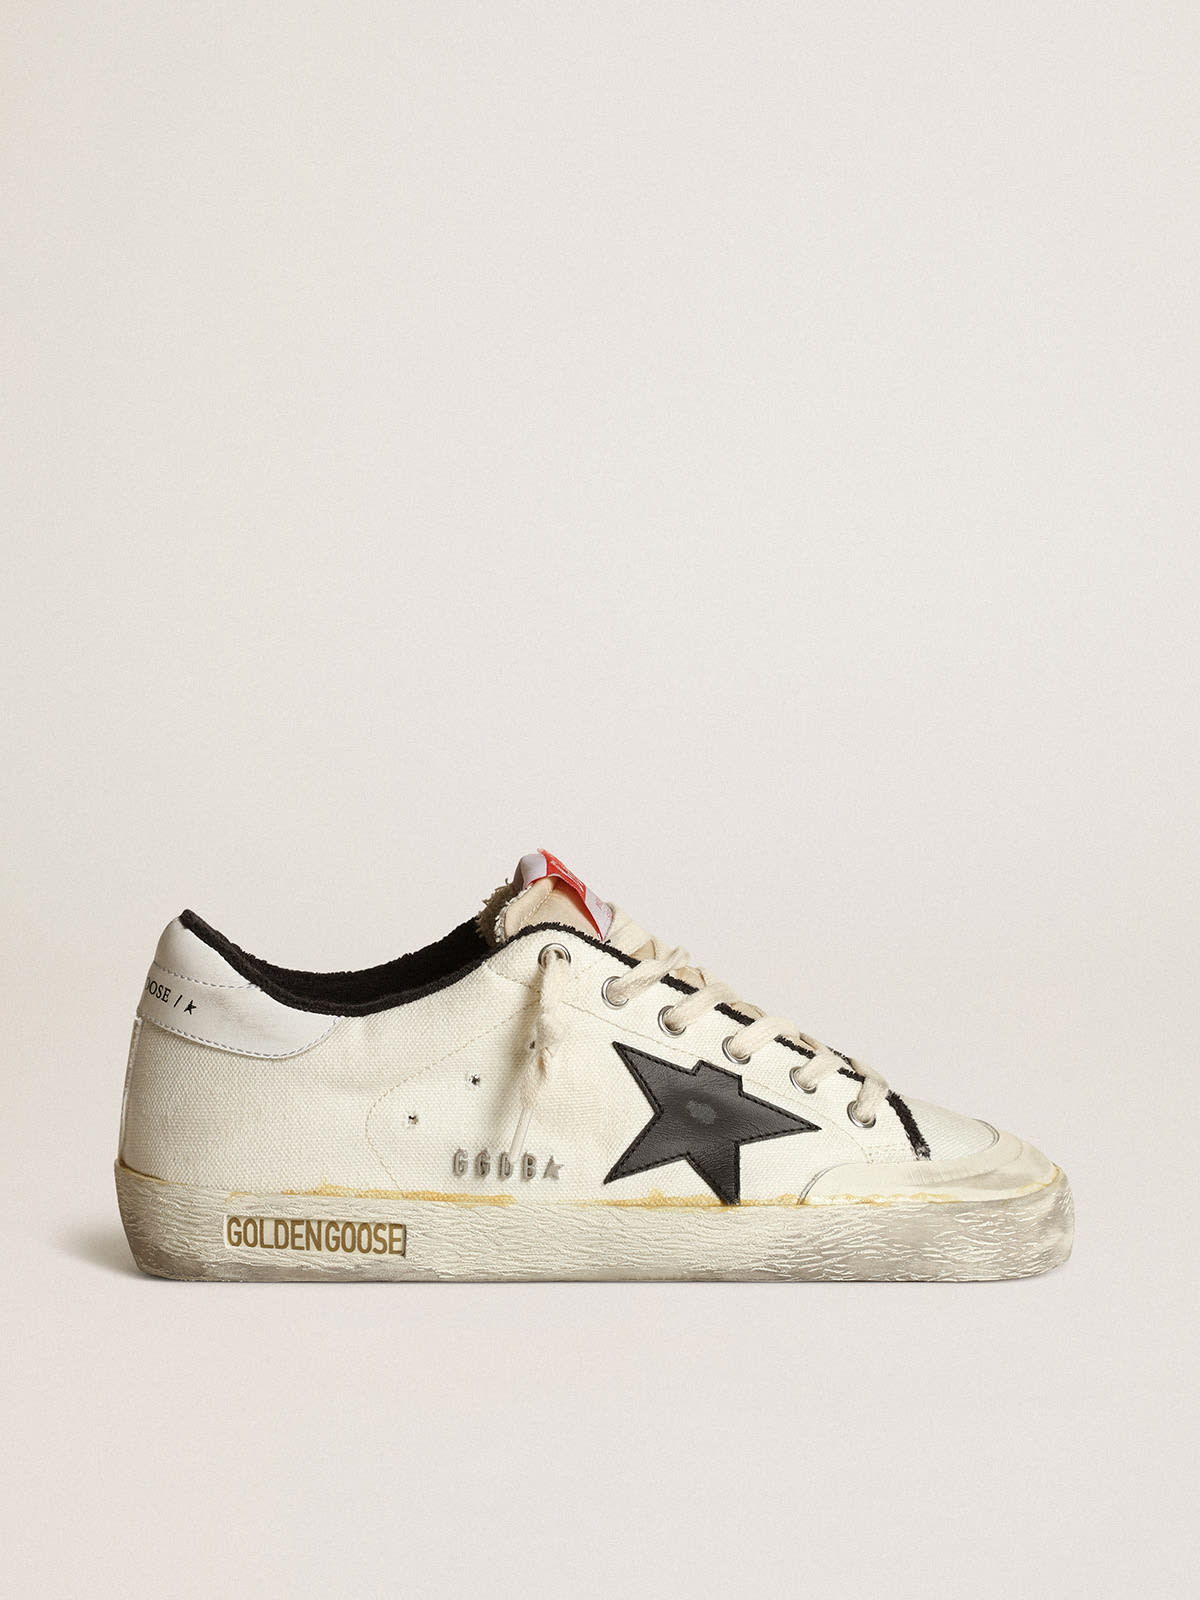 Golden Goose - Men’s Super-Star LTD sneakers in beige canvas with black leather star and white leather heel tab in 